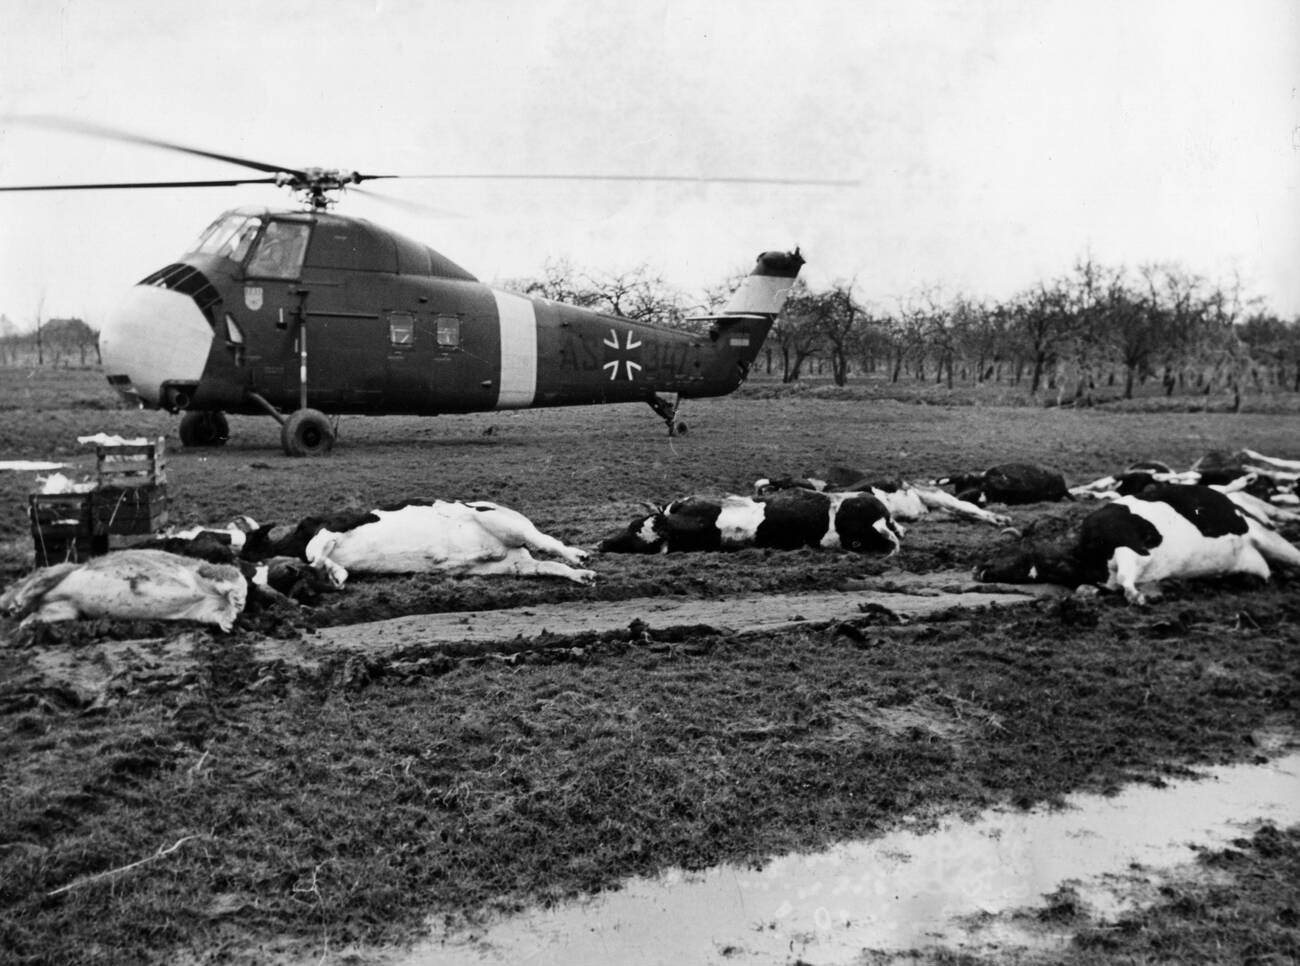 Helicopter beside dead cows during the North Sea Flood of 1962 in Hamburg, West Germany